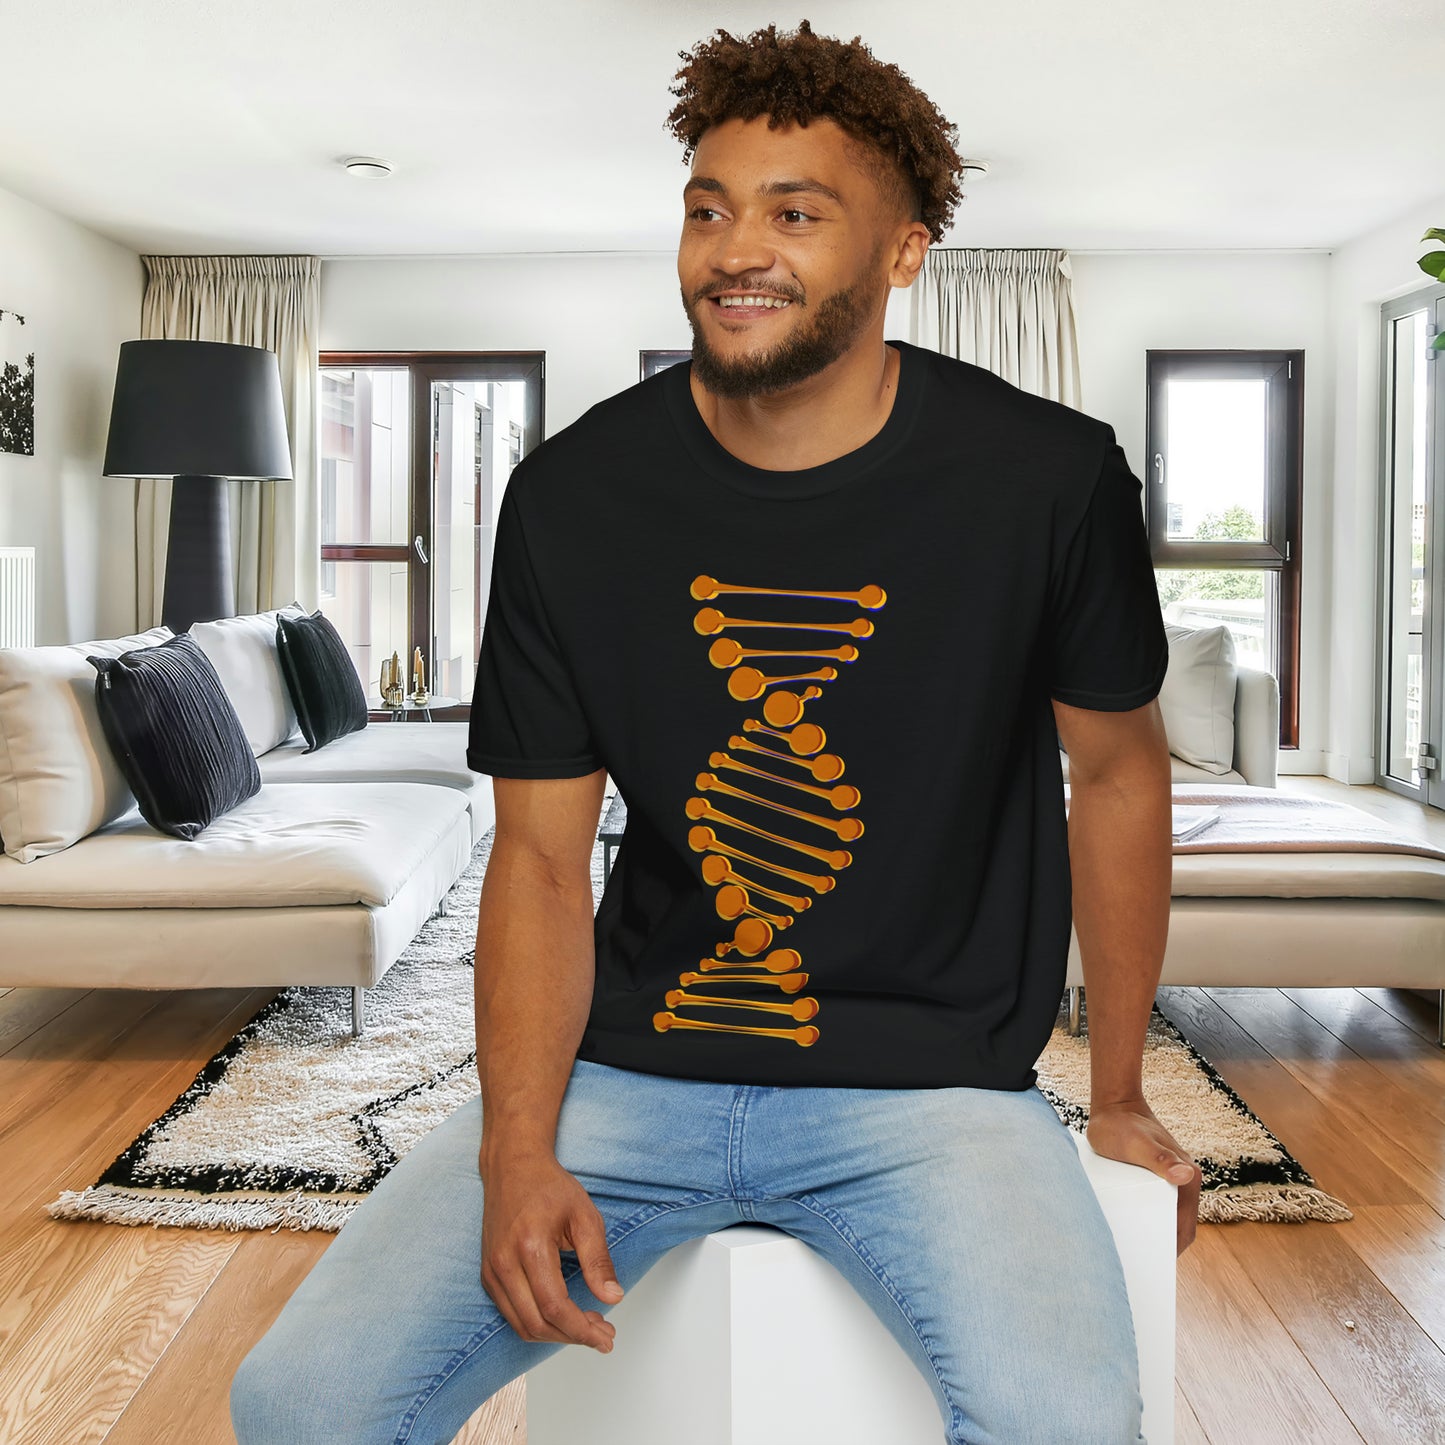 DNA inspired design Unisex Softstyle T-Shirt for you.